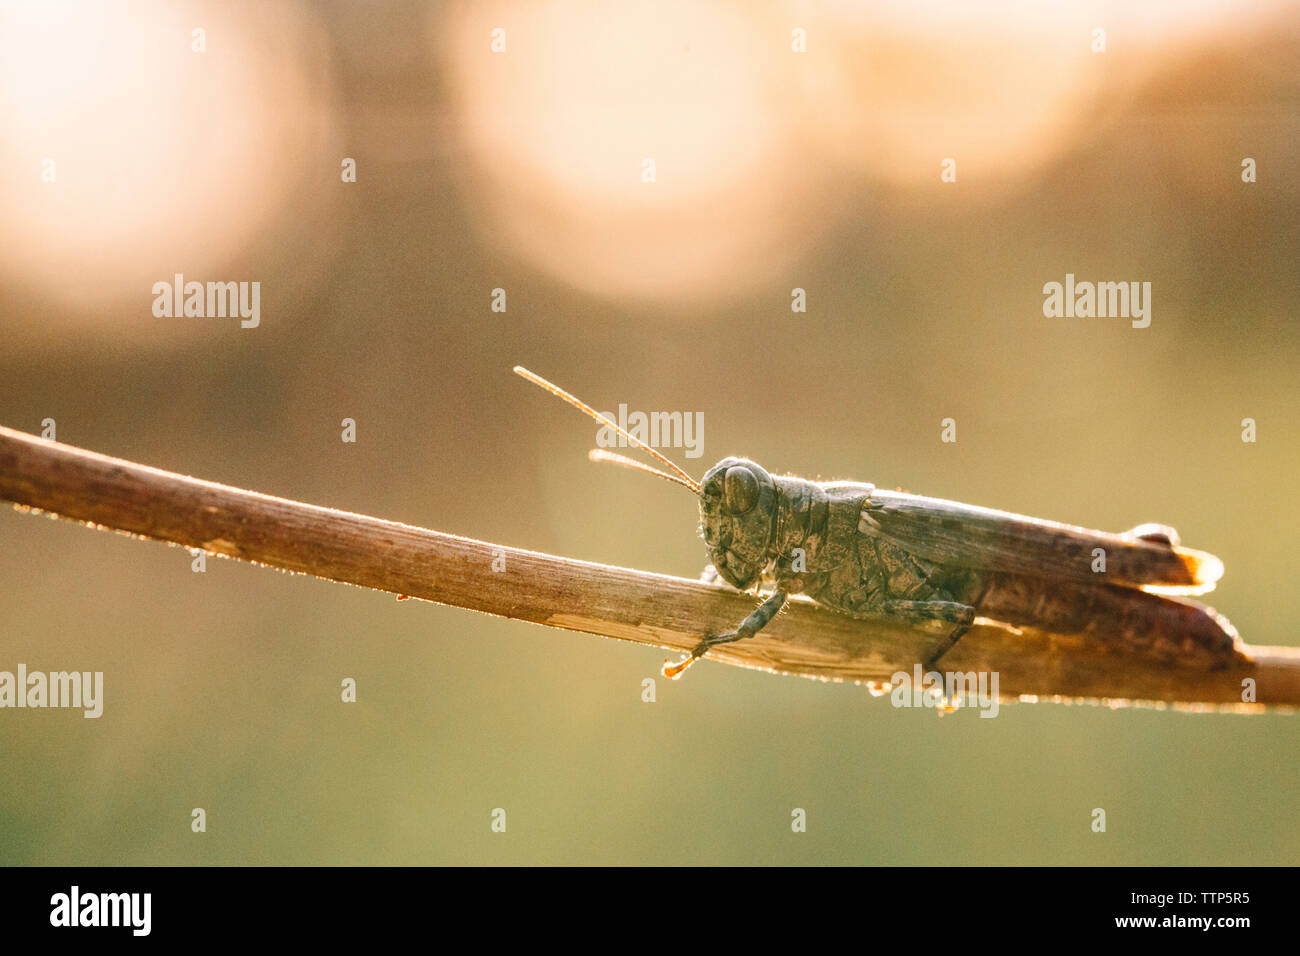 Side view of grasshopper on twig Stock Photo